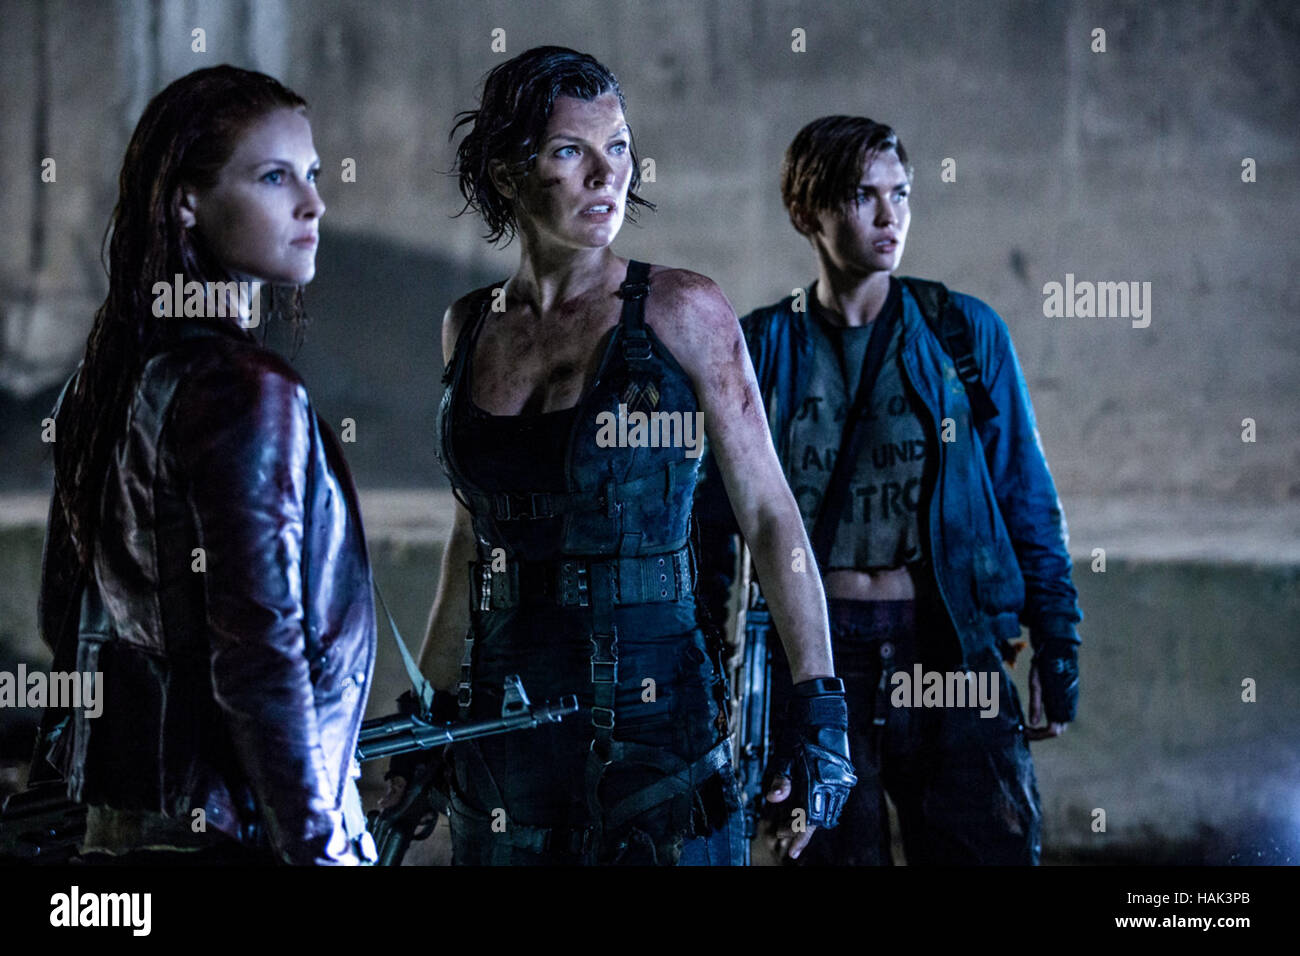 L-R) Resident Evil: The Final Chapter Cast - Fraser James, Ruby Rose,  Milla Jovovich, Director Paul W.S. Anderson, William Levy, Ali Larter, Rola  and Eoin Macken arrives at the Resident Evil: The